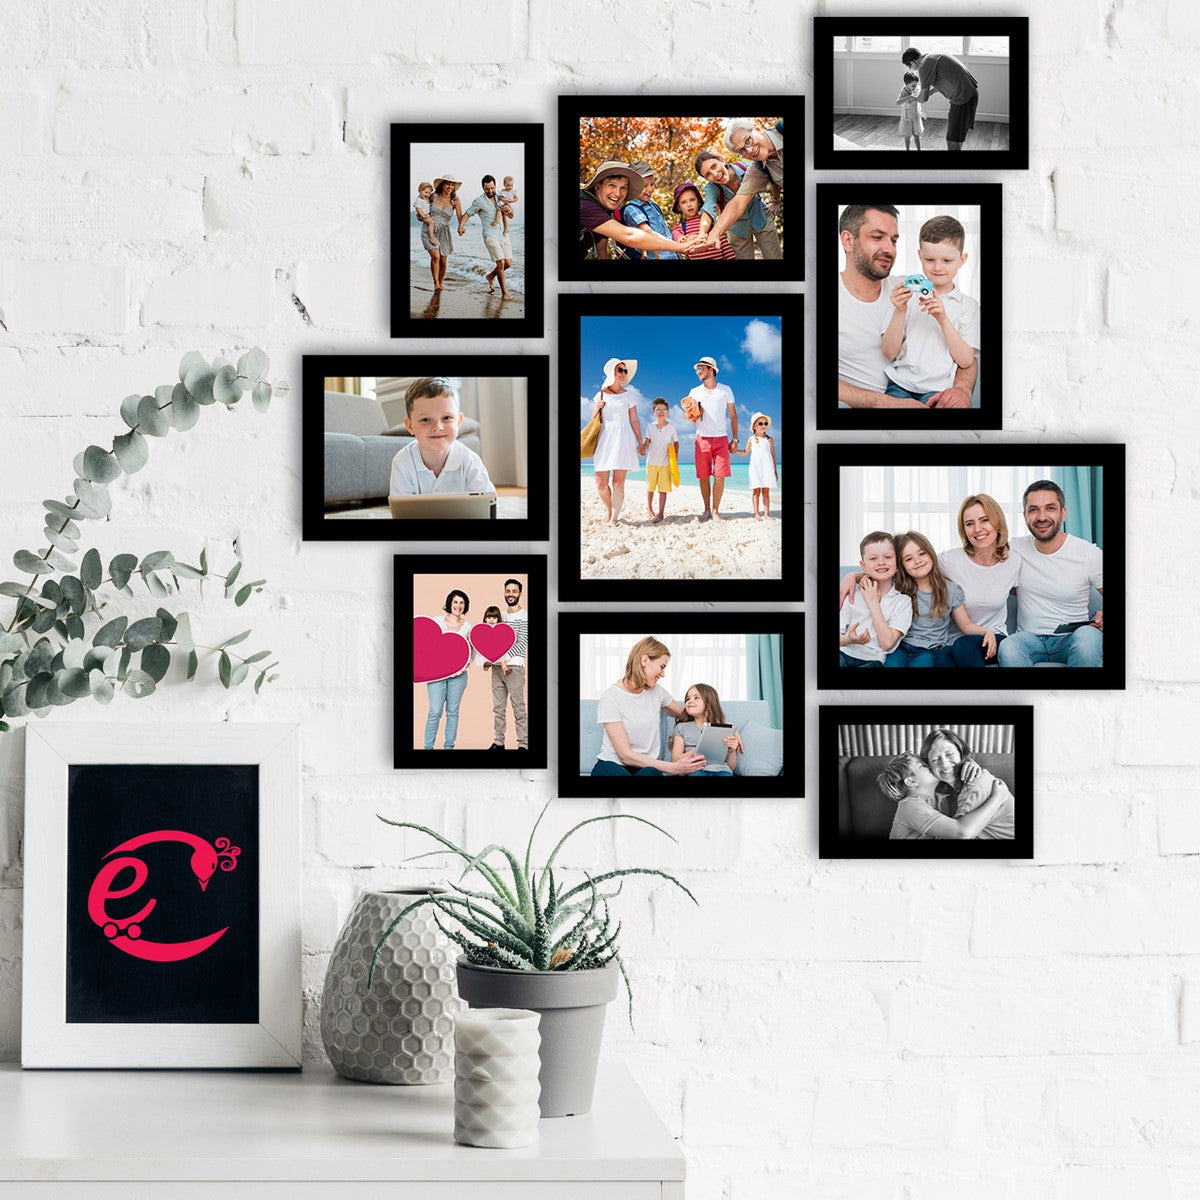 Memory Wall Collage Photo Frame - Set of 10 Photo Frames for 4 Photos of 5"x7", 4 Photos of 6"x8" and 2 Photos of 8"x10" 1